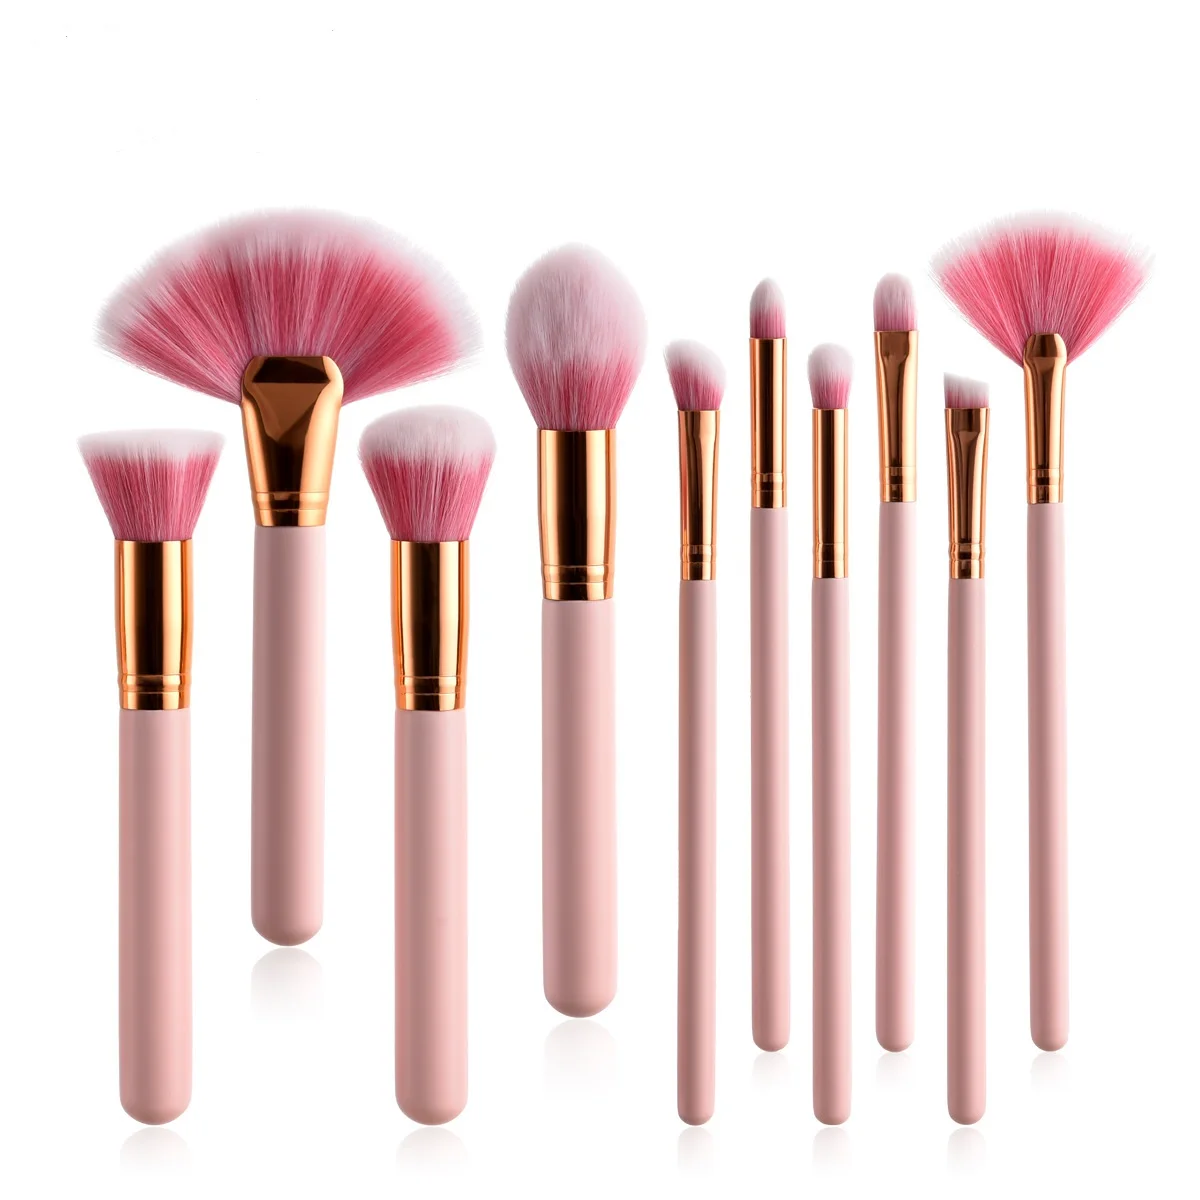 

HZM 10 pieces fan pink make up brushes free samples beauty products makeup brush set make-up brush brochas maquillajes